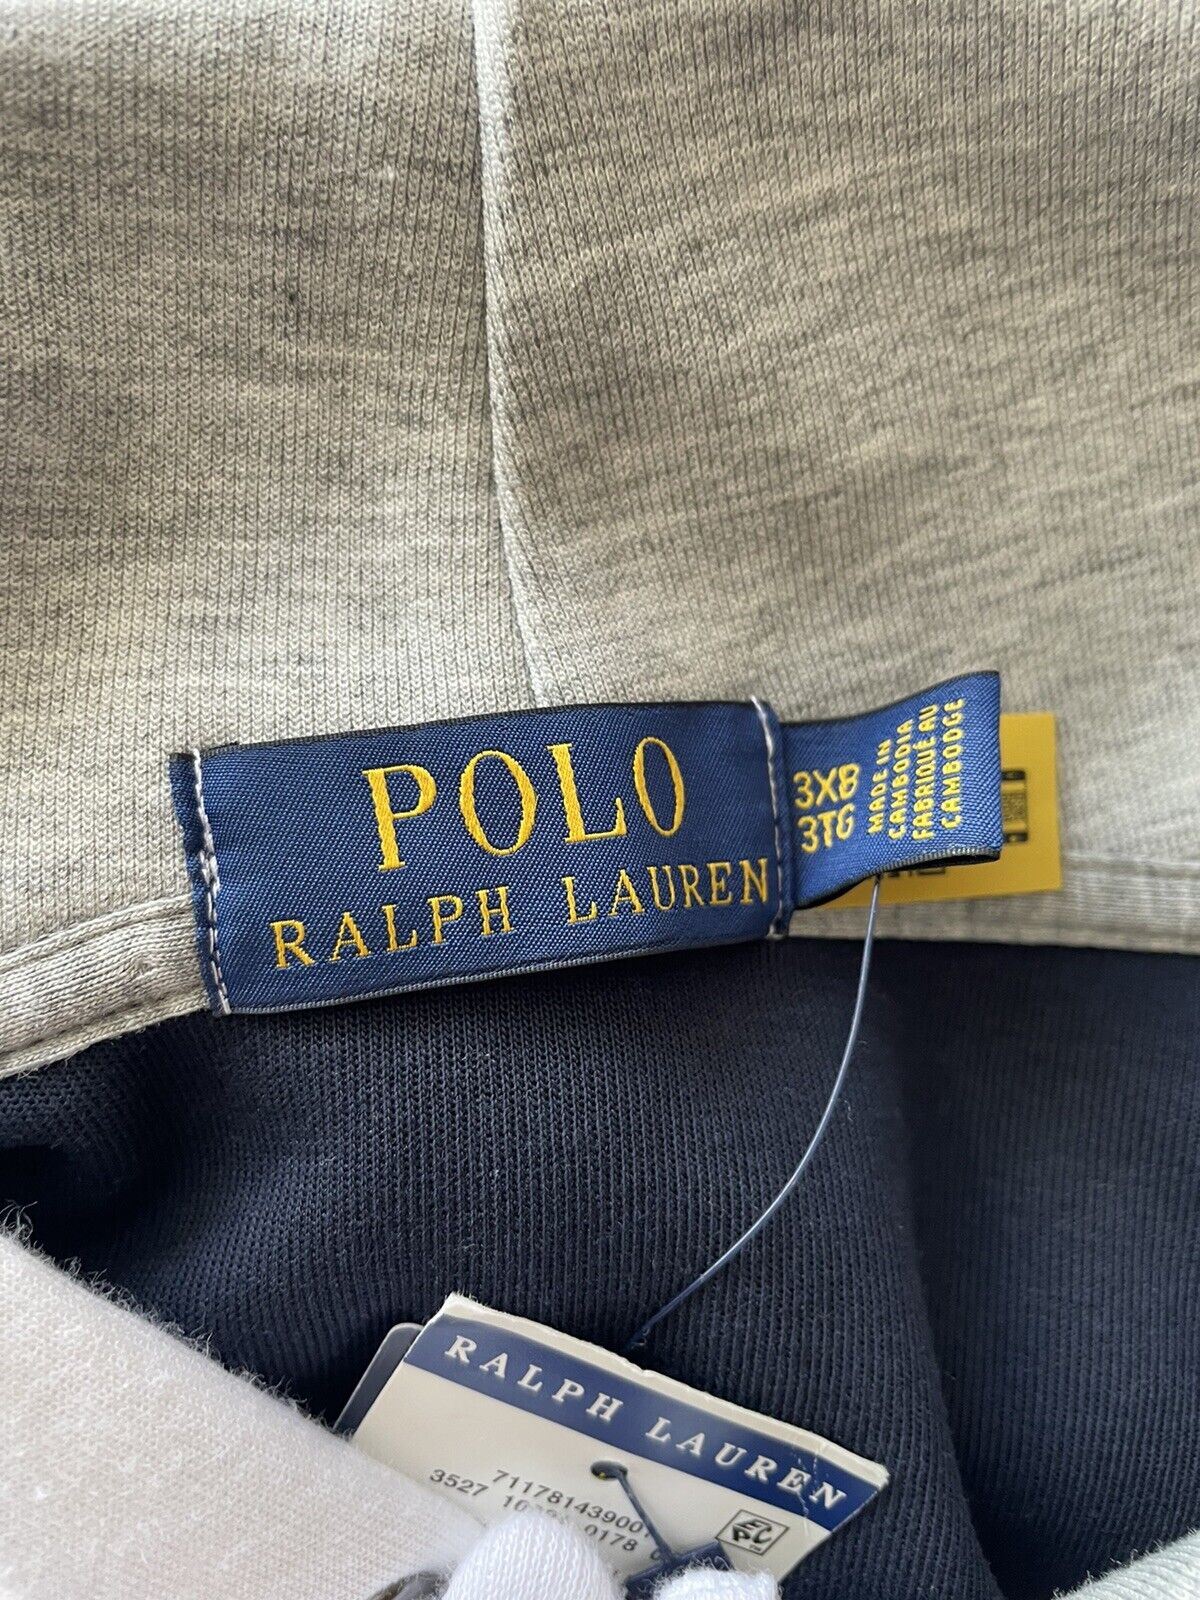 NWT $168 Polo Ralph Lauren Long Sleeve Sweater with Hoodie Navy 3XB/3TG